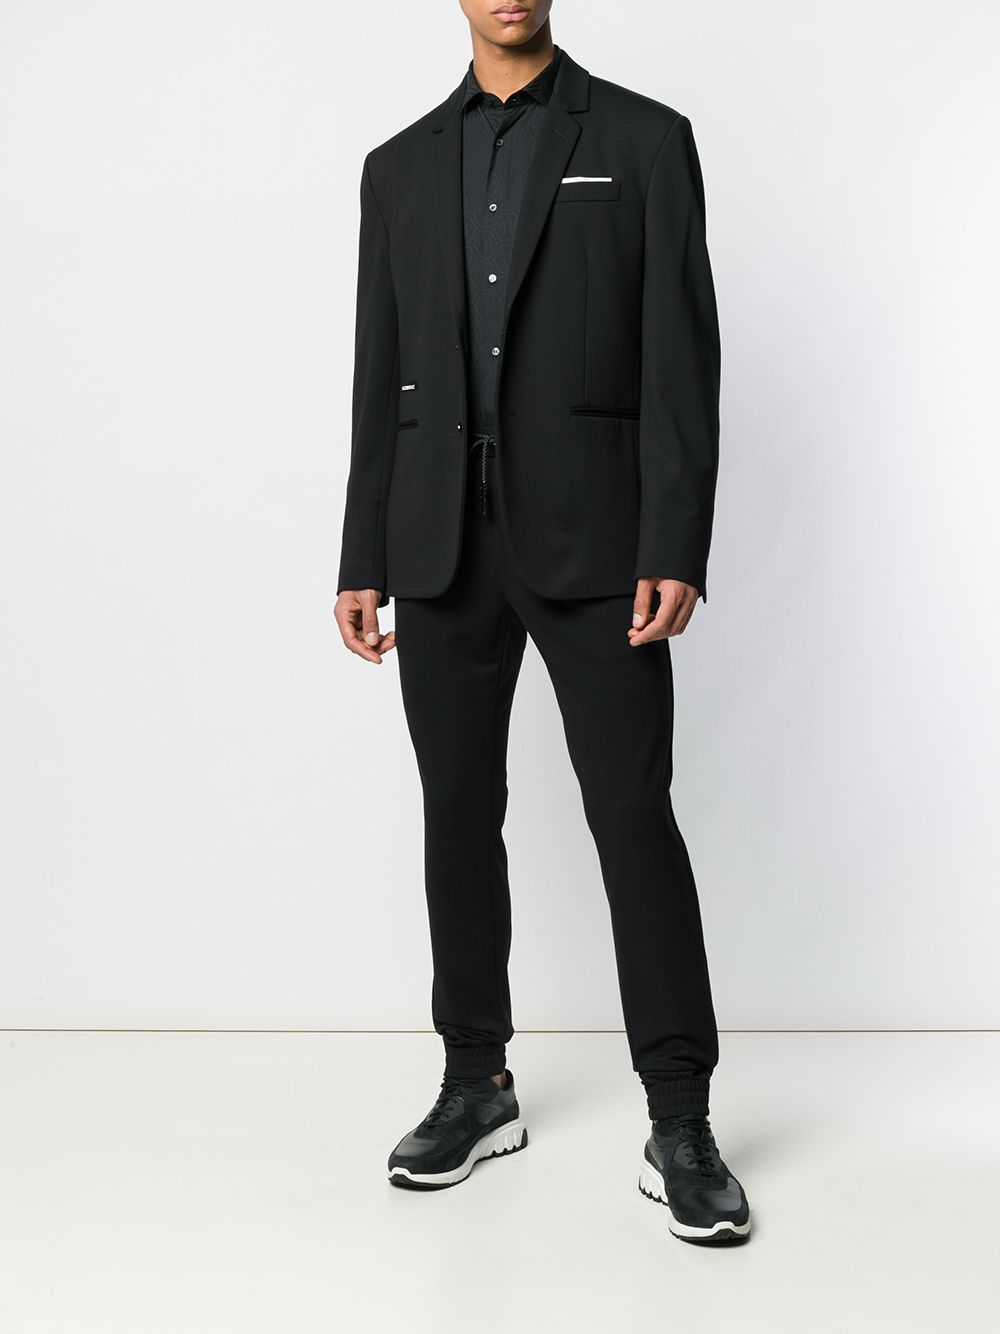 Shop Philipp Plein sport style suit with Express Delivery - FARFETCH